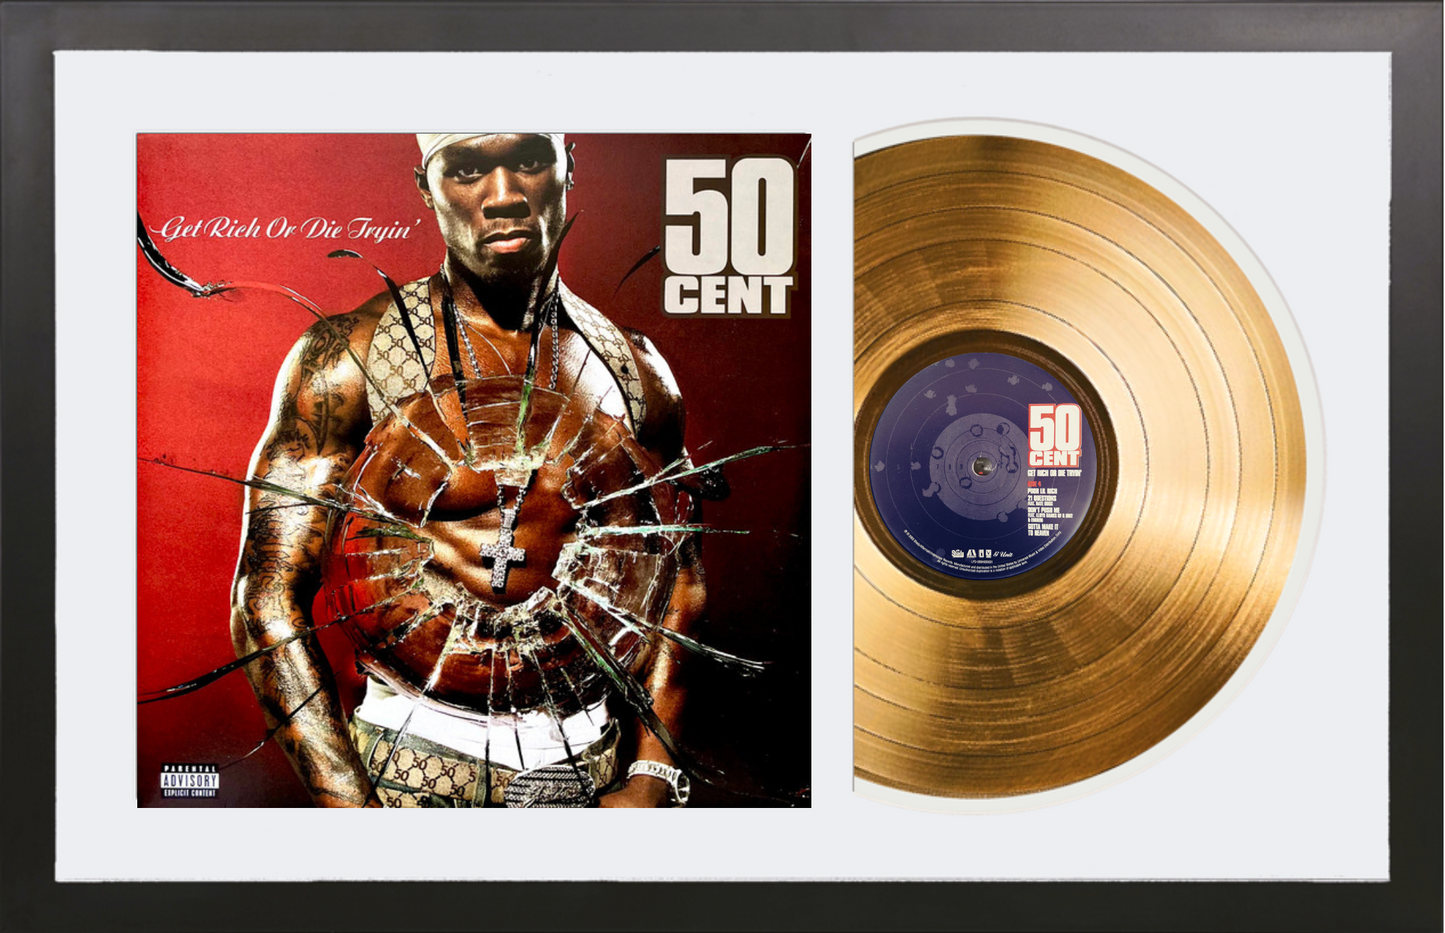 50 Cent - Get Rich Or Die Tryin' - 14K Gold-Plated Vinyl